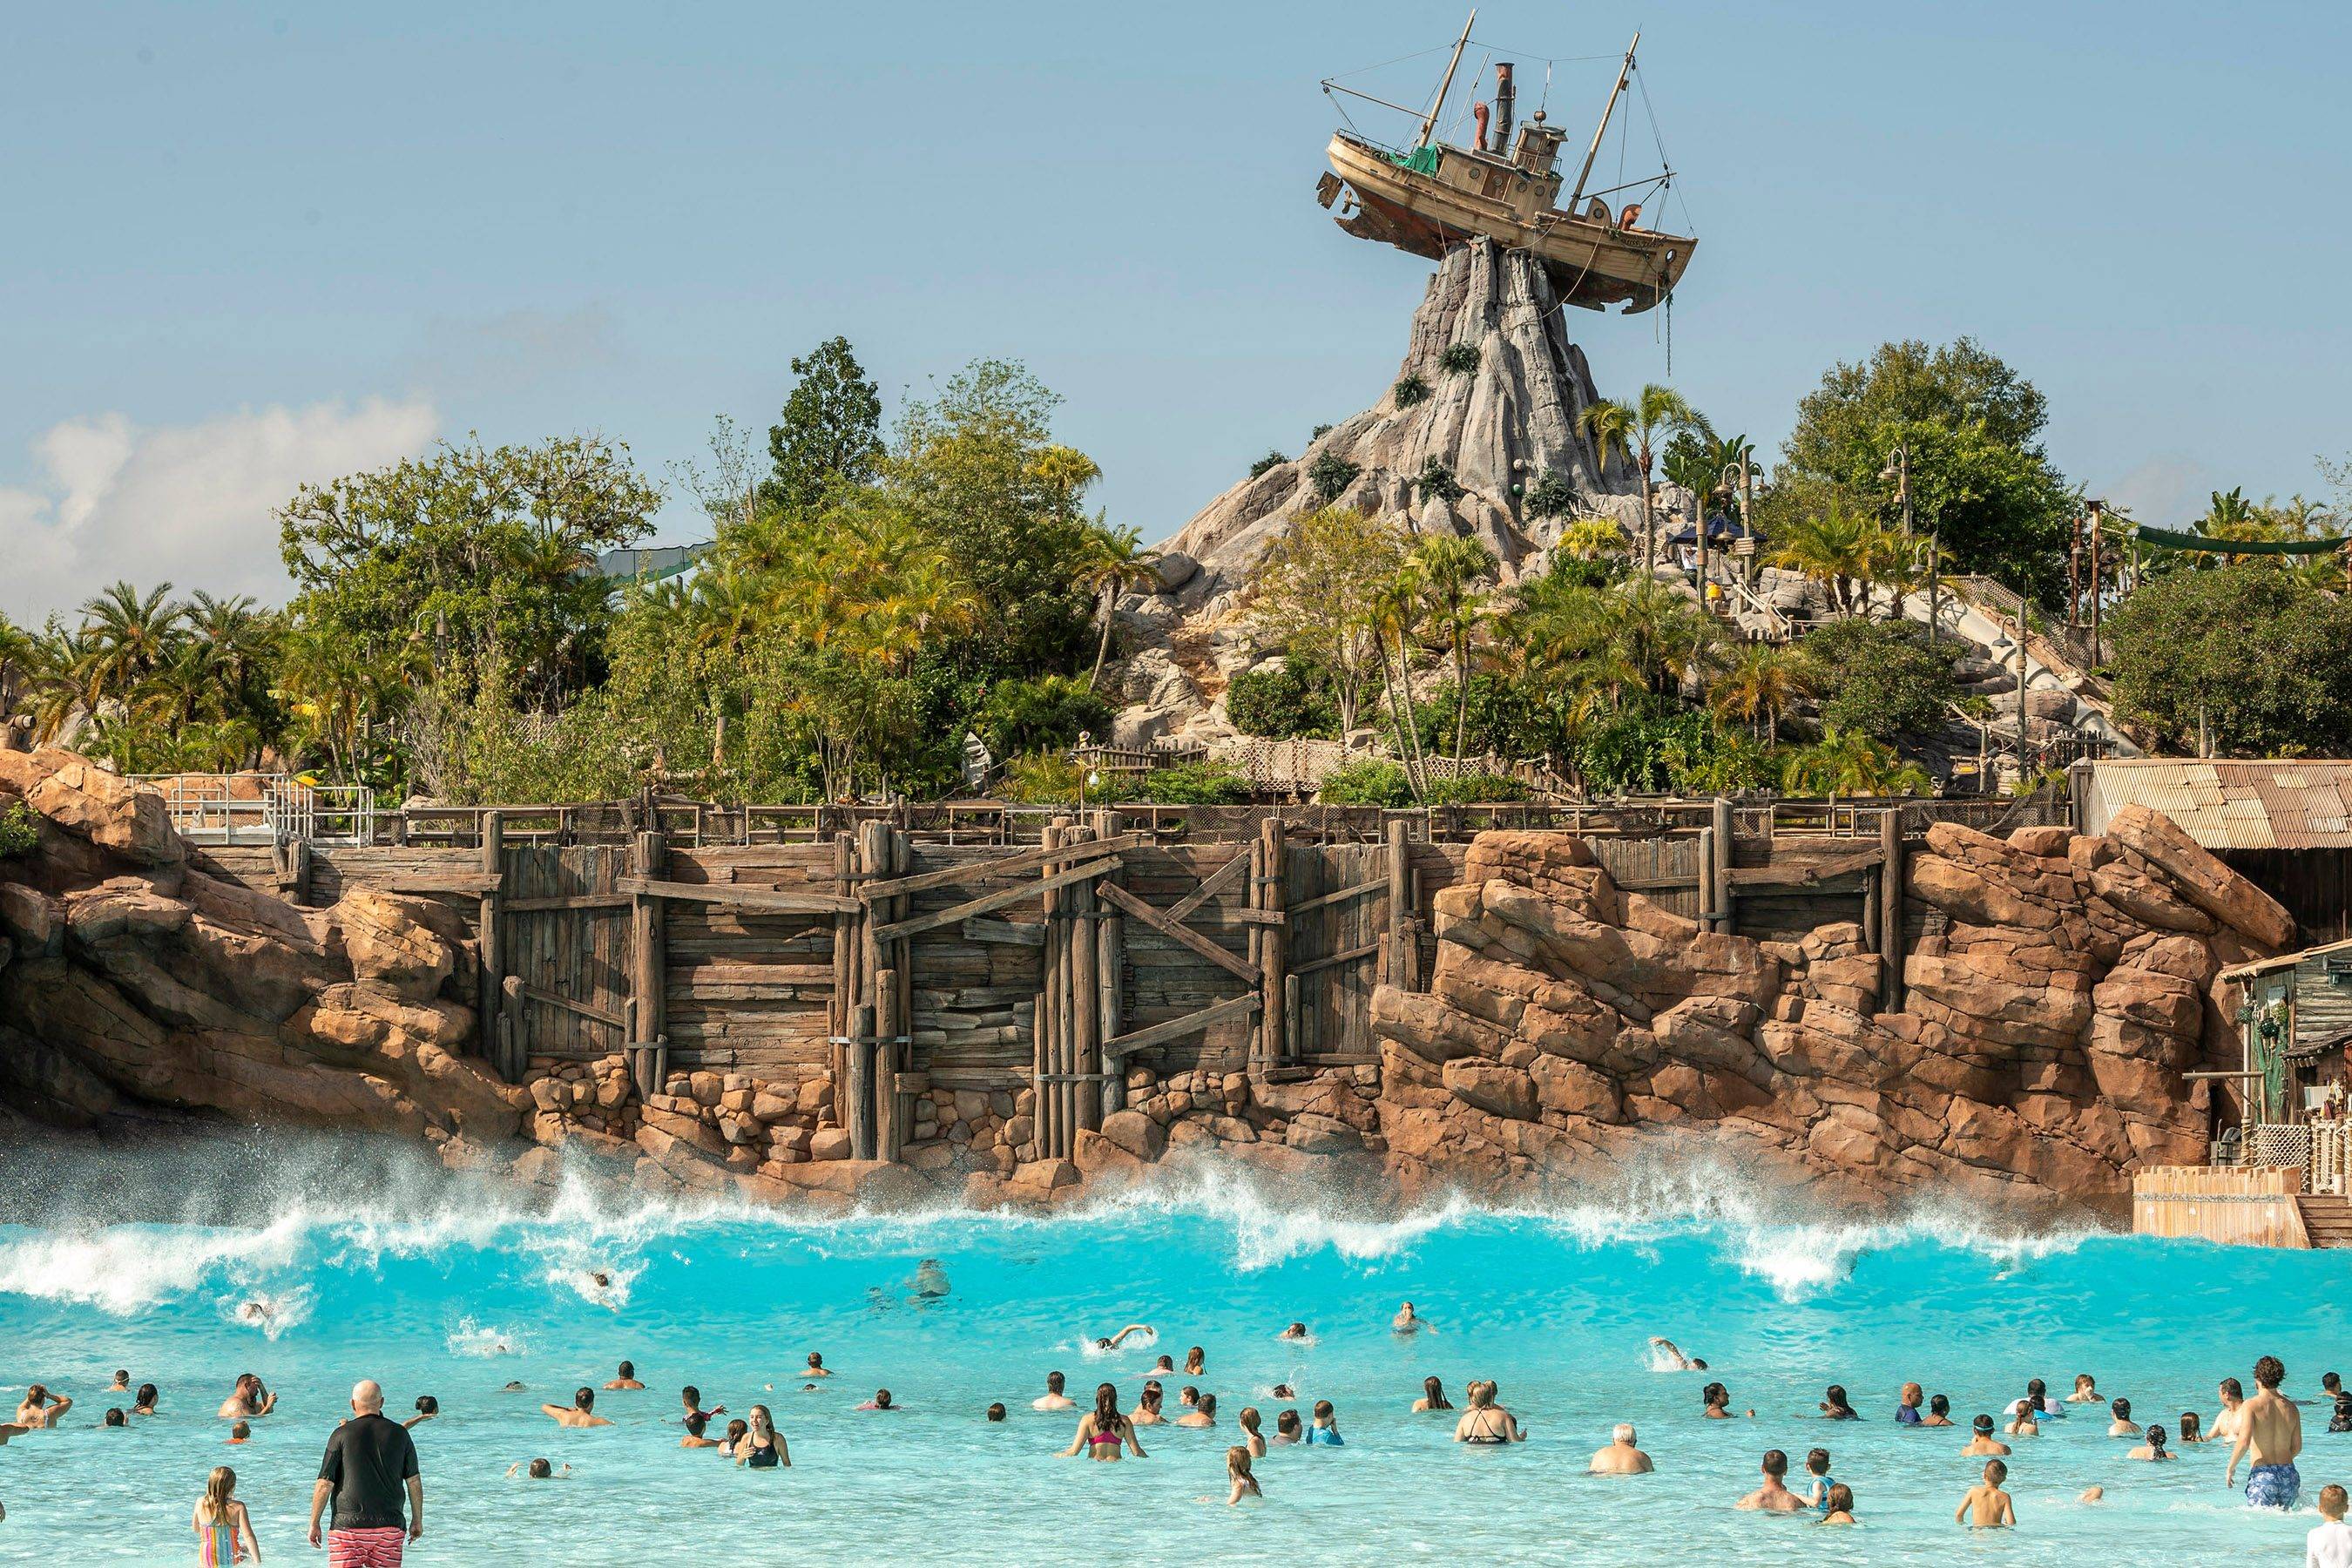 Guests at value and moderate resorts will have direct bus service to Typhoon Lagoon this summer